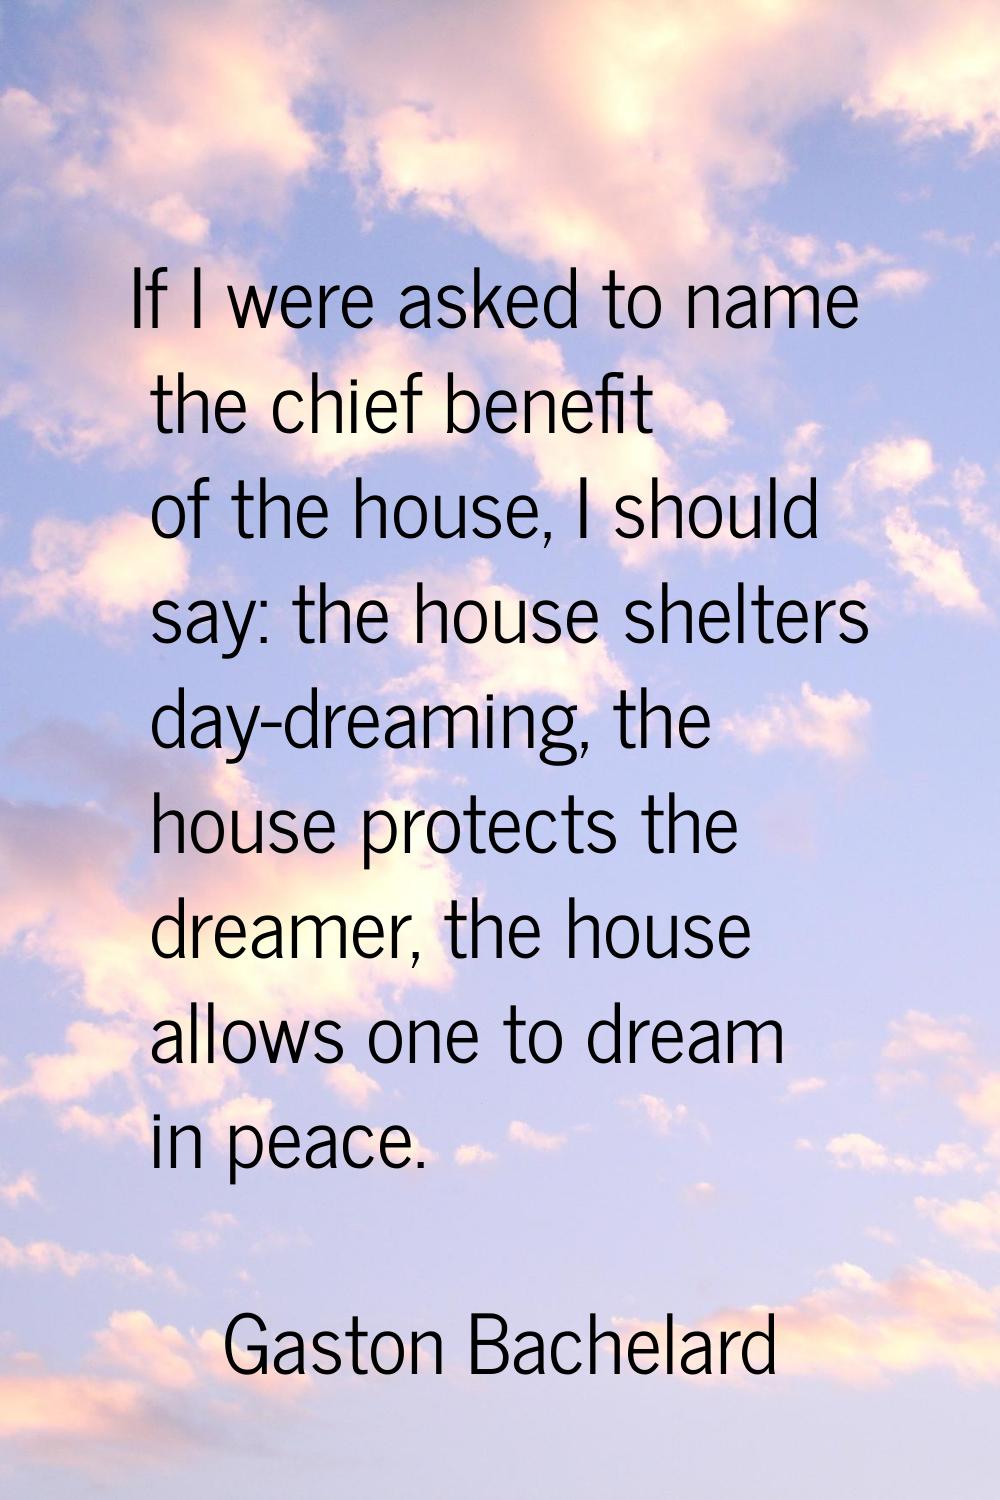 If I were asked to name the chief benefit of the house, I should say: the house shelters day-dreami